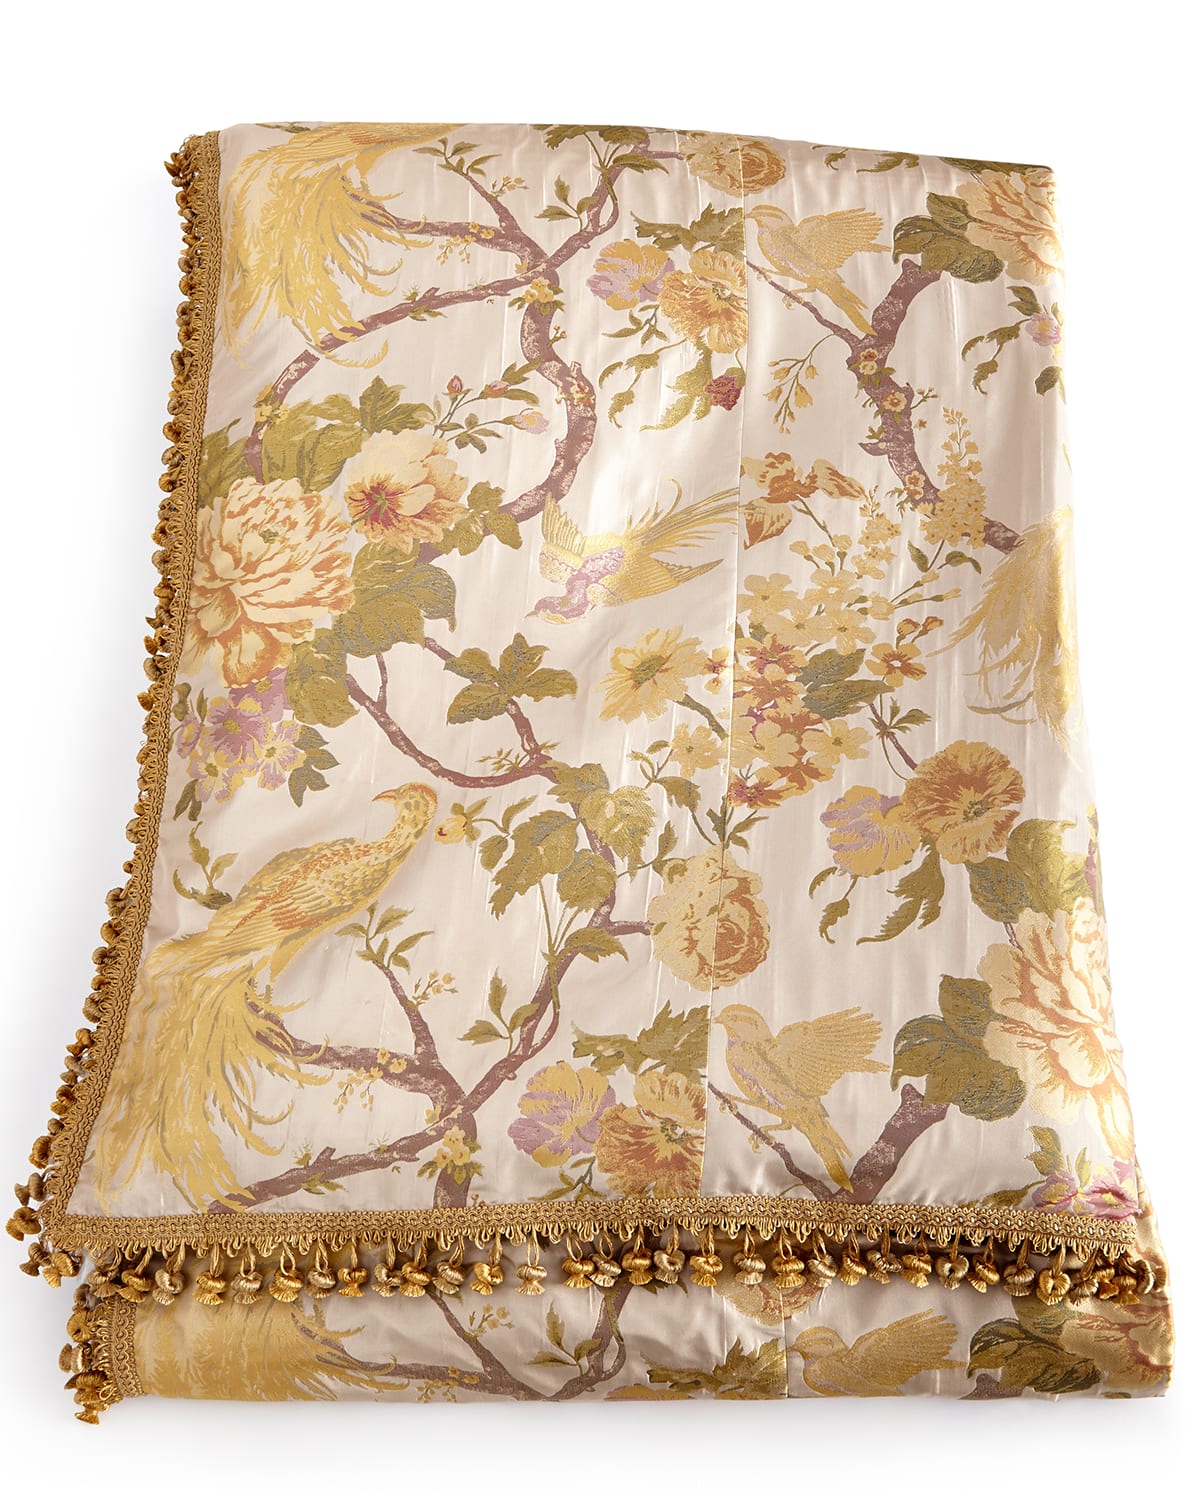 Image Sweet Dreams Queen Pheasant Duvet Cover with Onion Trim